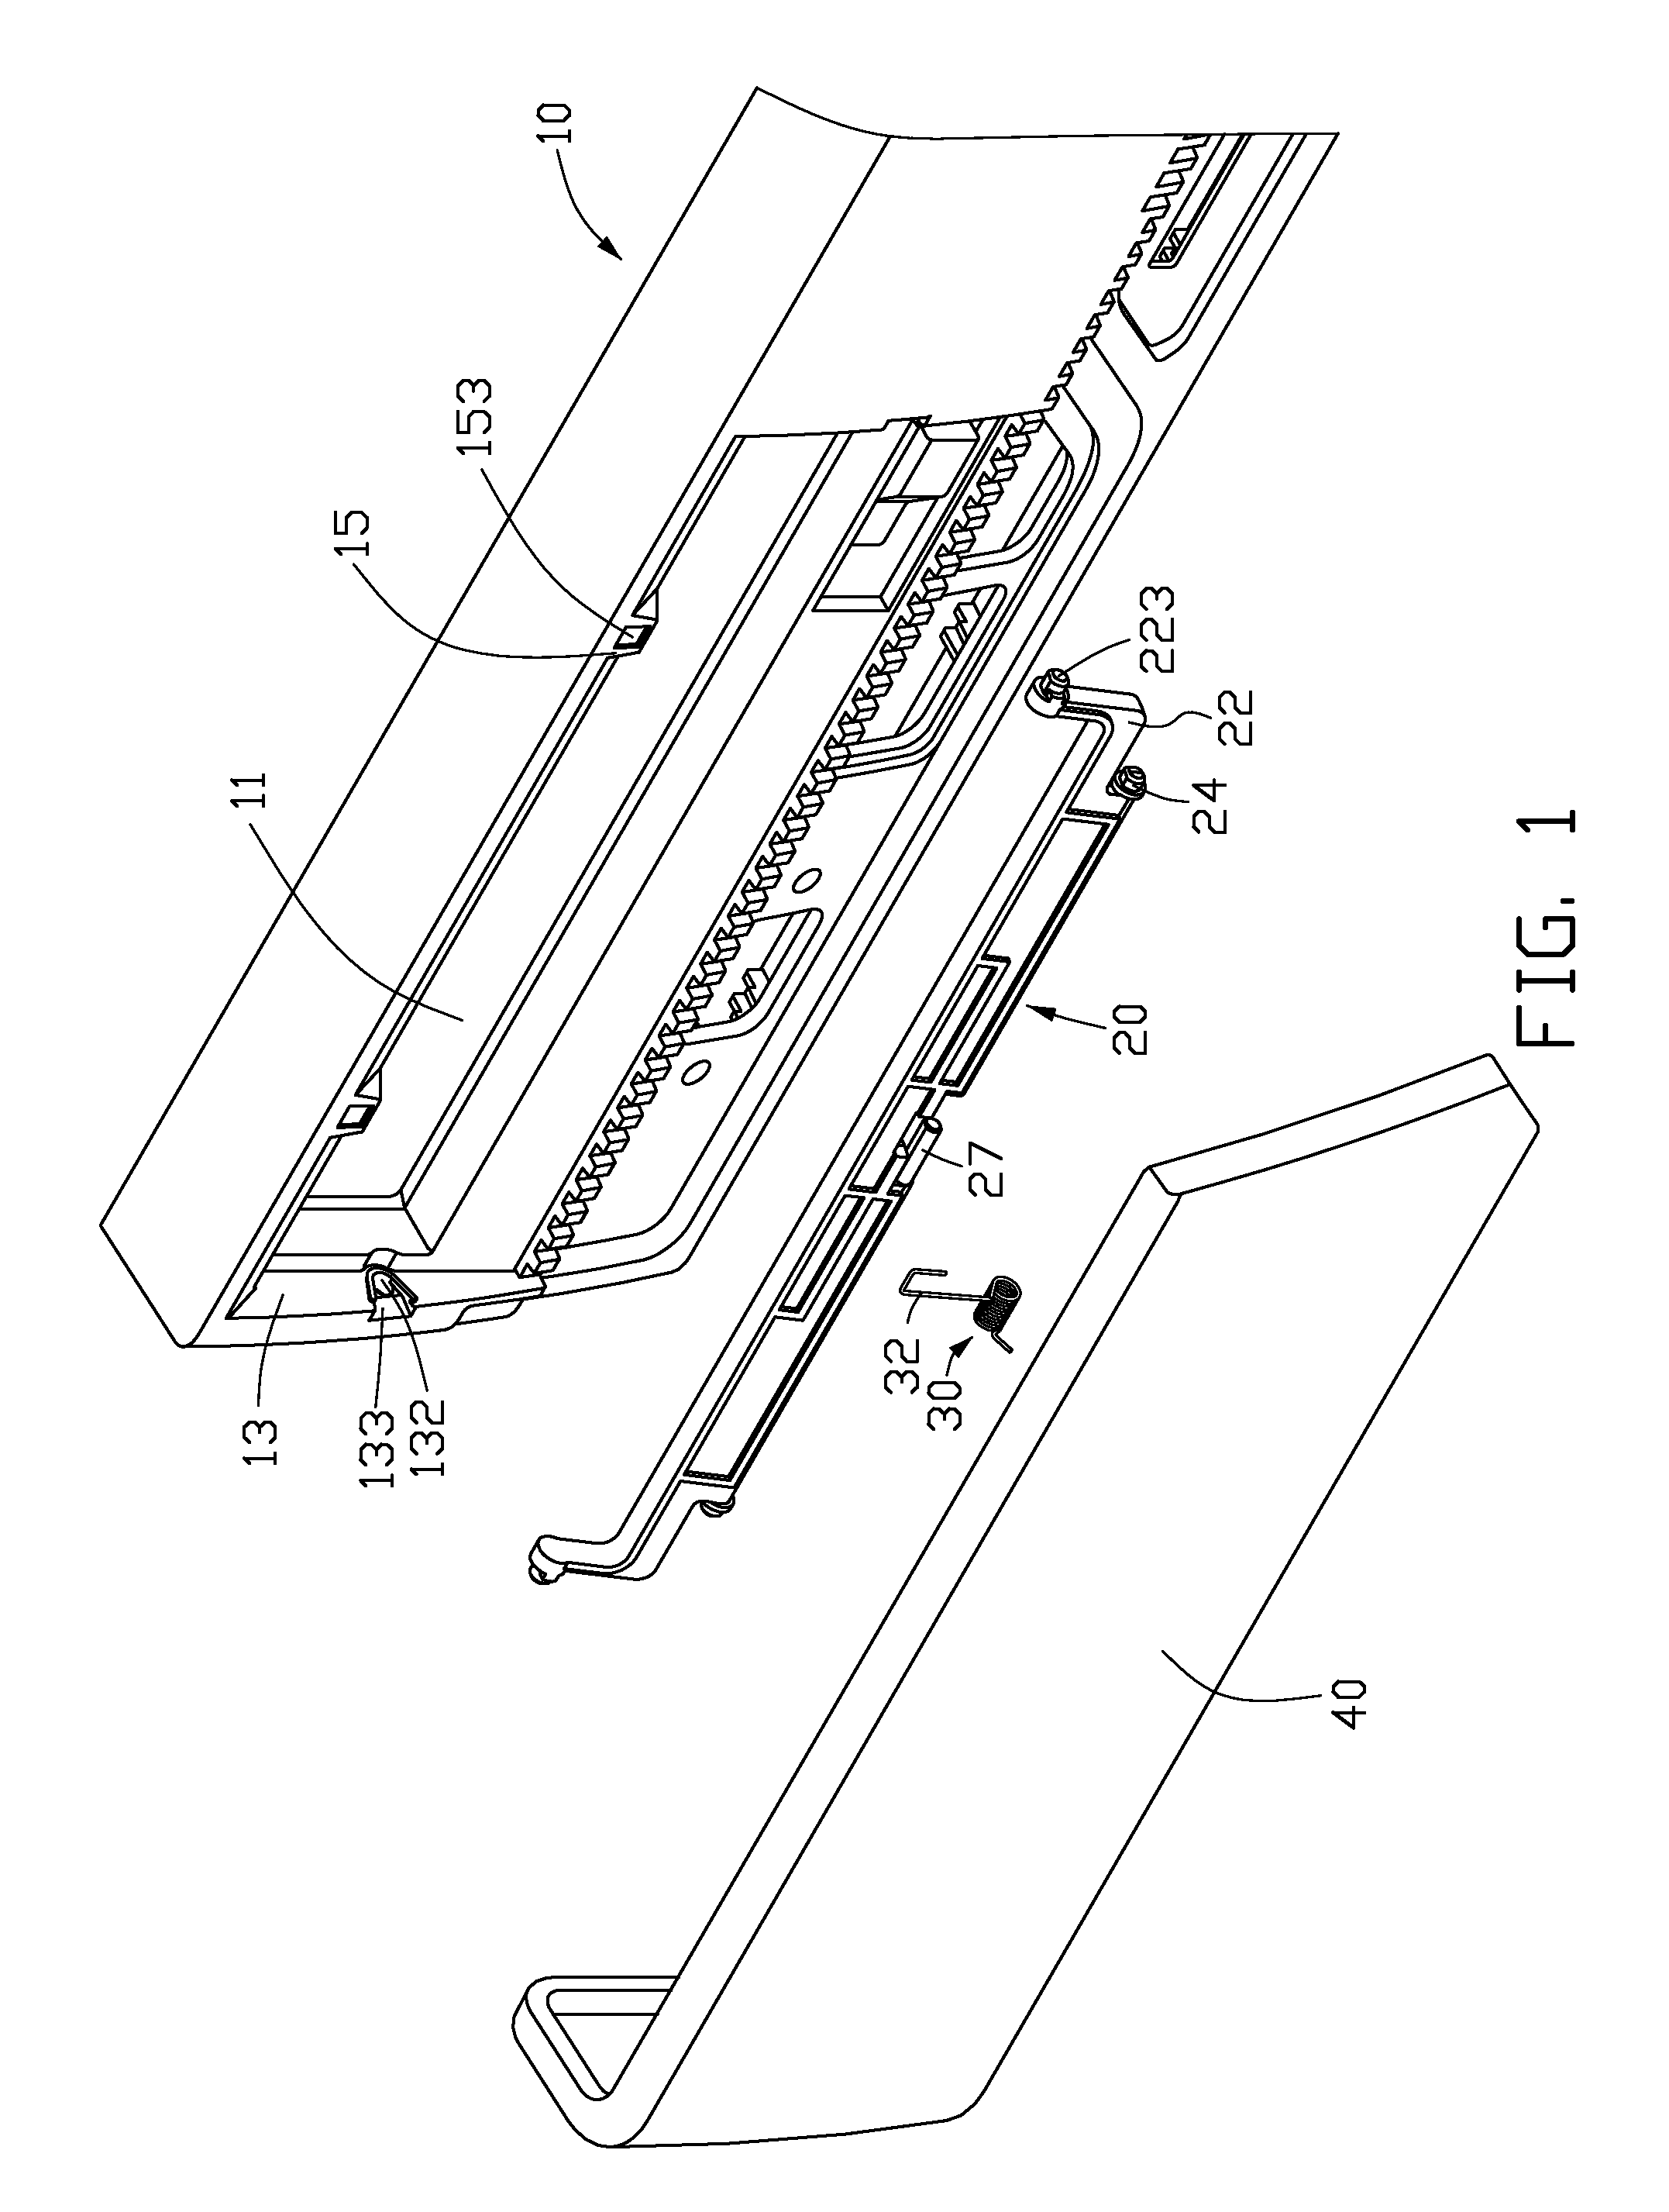 Cover assembly for storage device